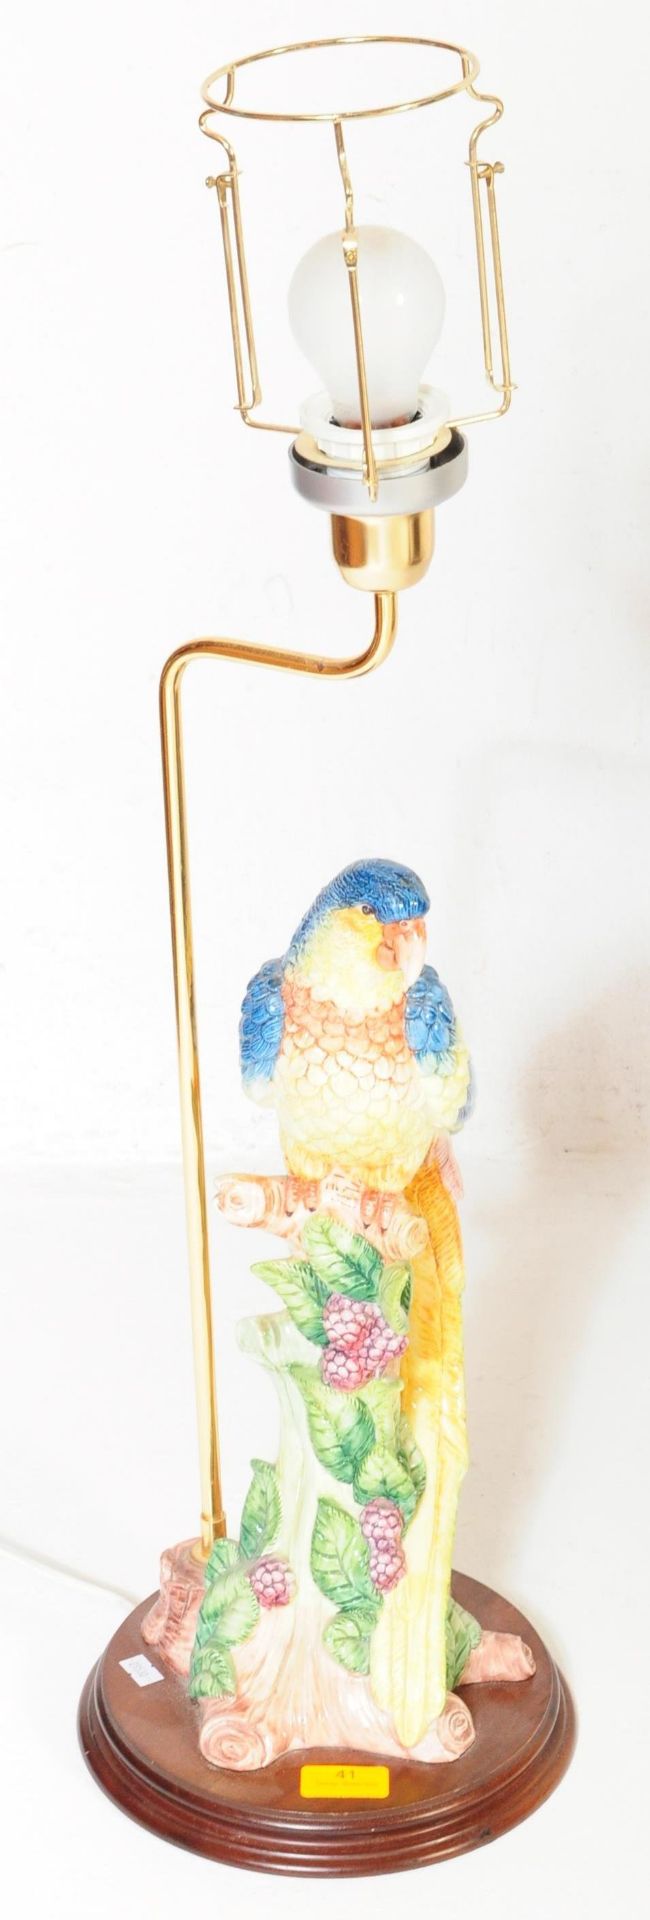 CONTEMPORARY MEISSEN STYLE PARROT LAMP - Image 2 of 5